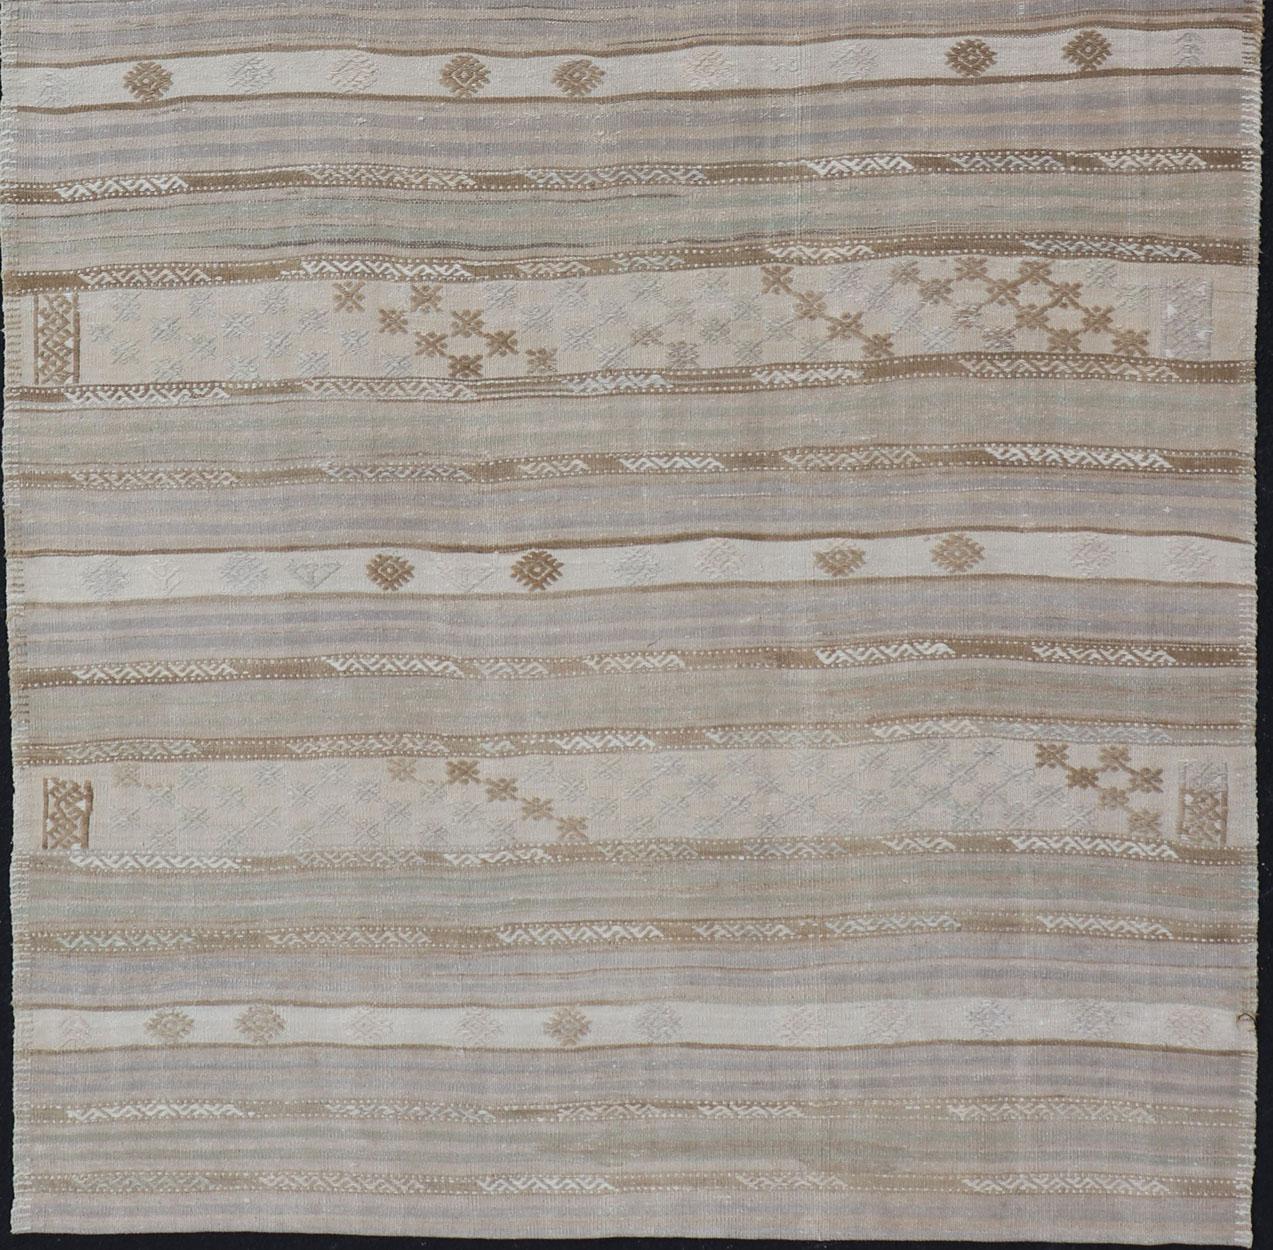 Striped Turkish Flat-Weave Kilim in Muted Colors and Tribal Motifs In Excellent Condition For Sale In Atlanta, GA